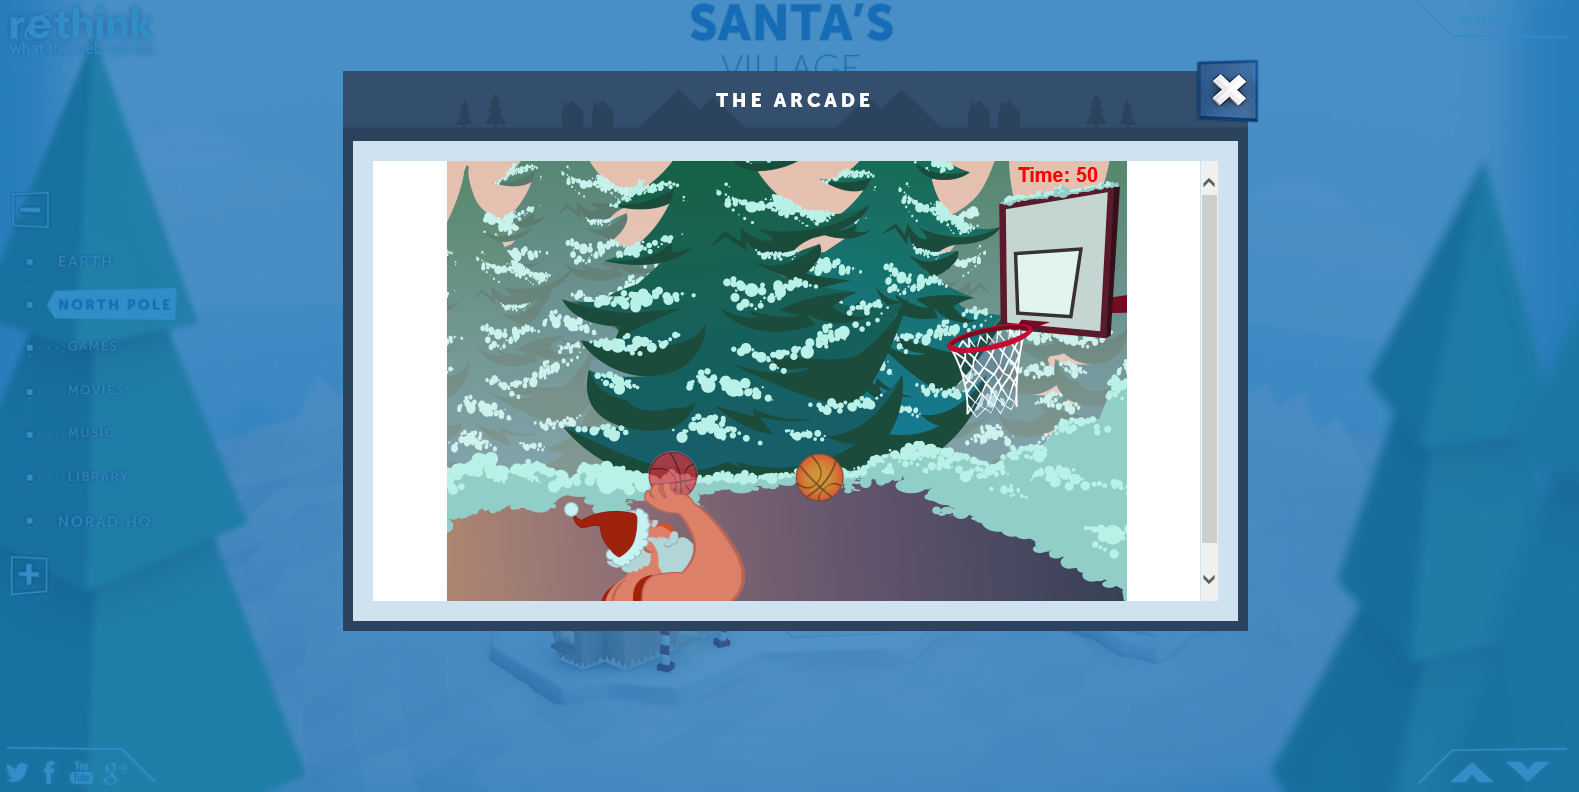  Santa’s arcade is one of the featured games on the site. New ones are available daily leading up to Christmas. 